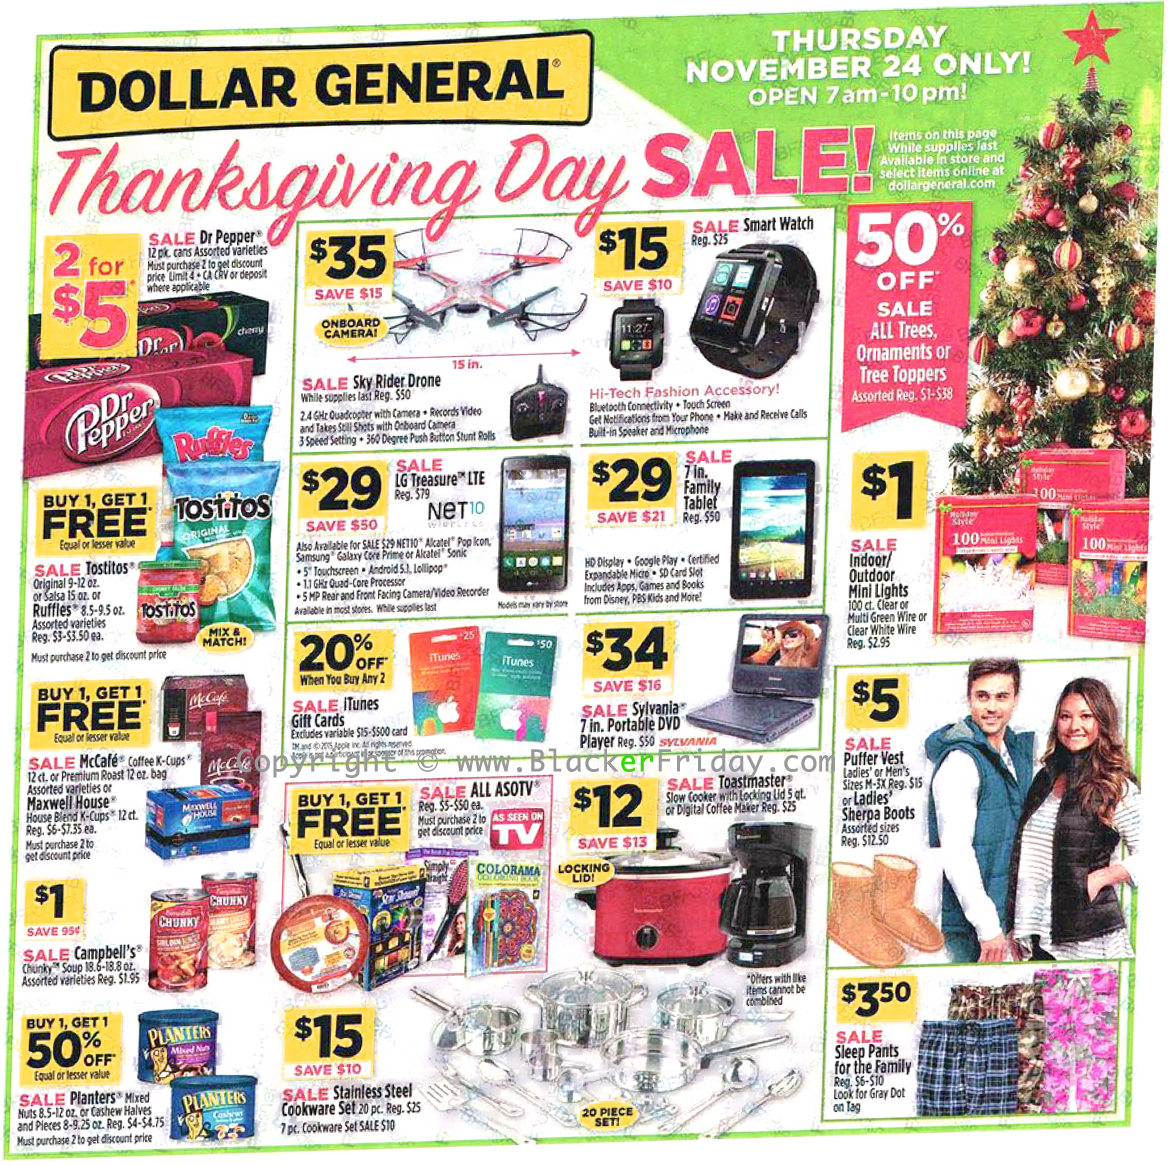 Dollar General Black Friday 2017 Deals &amp; Store Hours ...